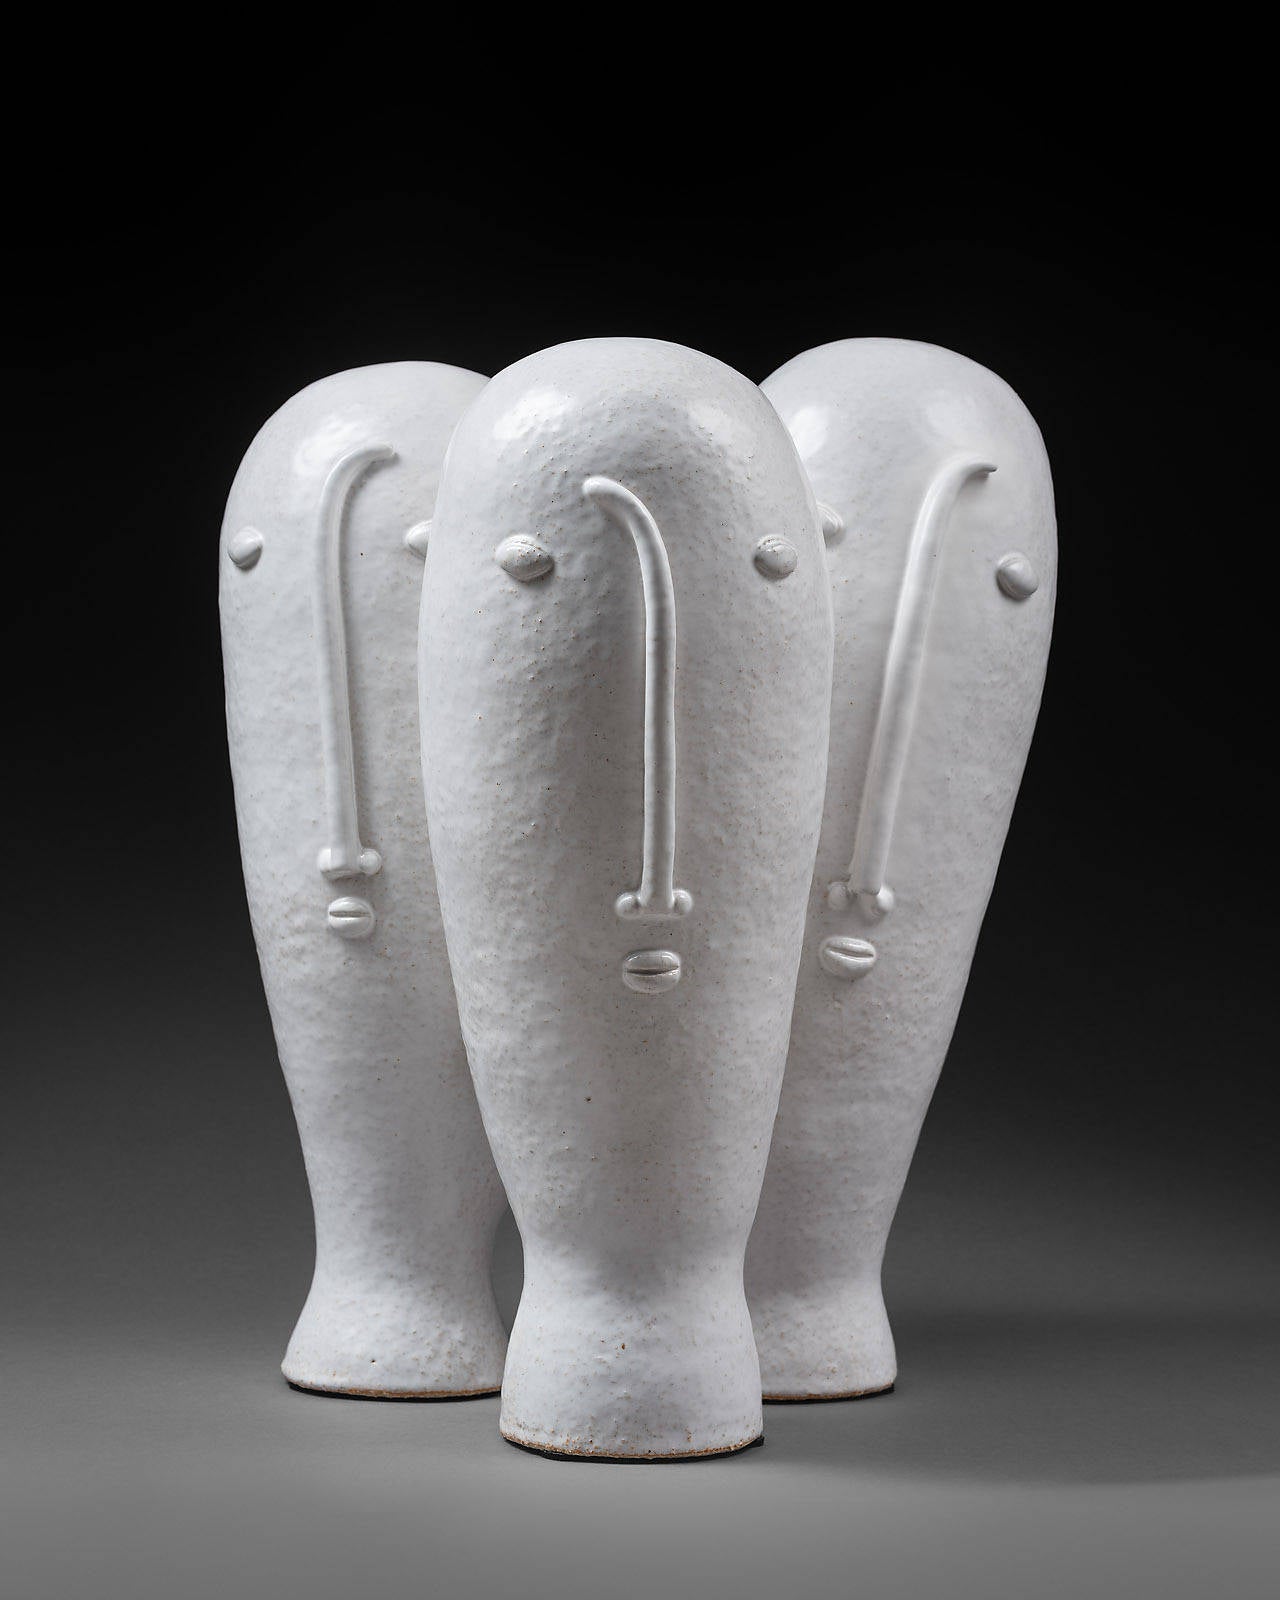 French Biomorphic White Sculpture by DaLo, 2015